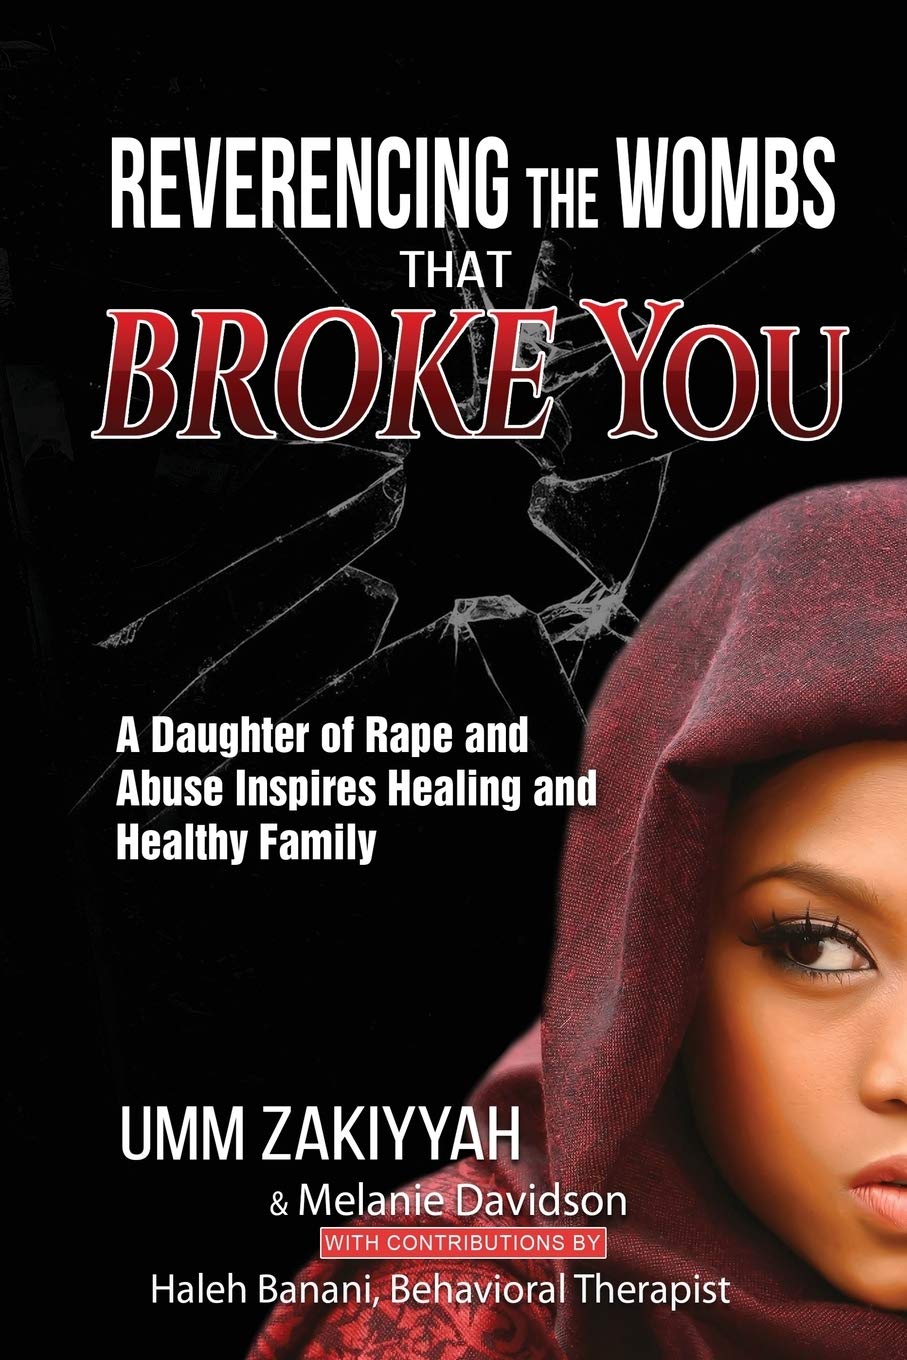 Reverencing the Wombs That Broke You: A Daughter of Rape and Abuse Inspires Healing and Healthy Family